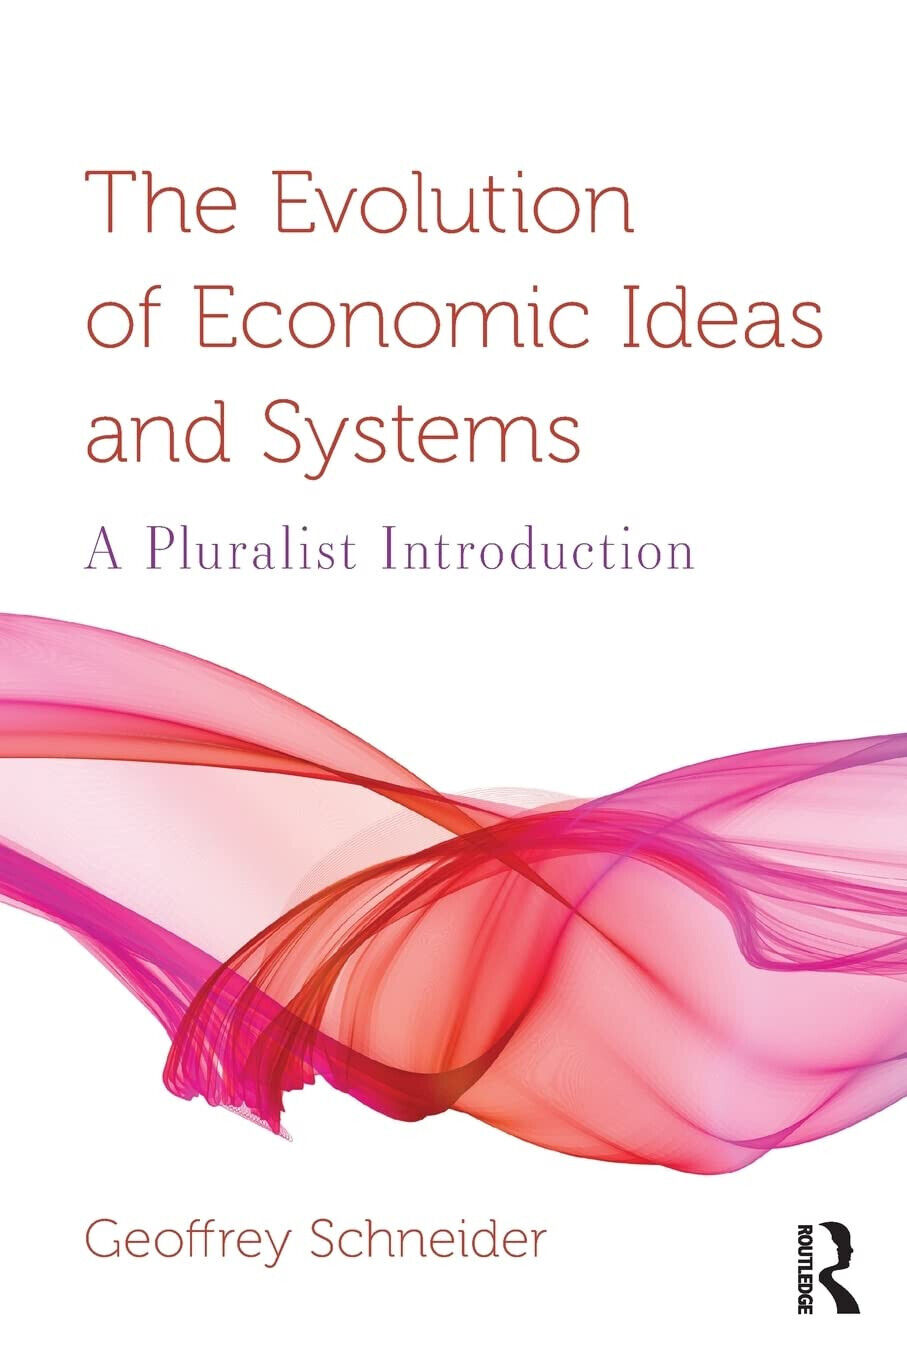 The Evolution of Economic Ideas and Systems - Geoffrey - Taylor & Francis, 2018